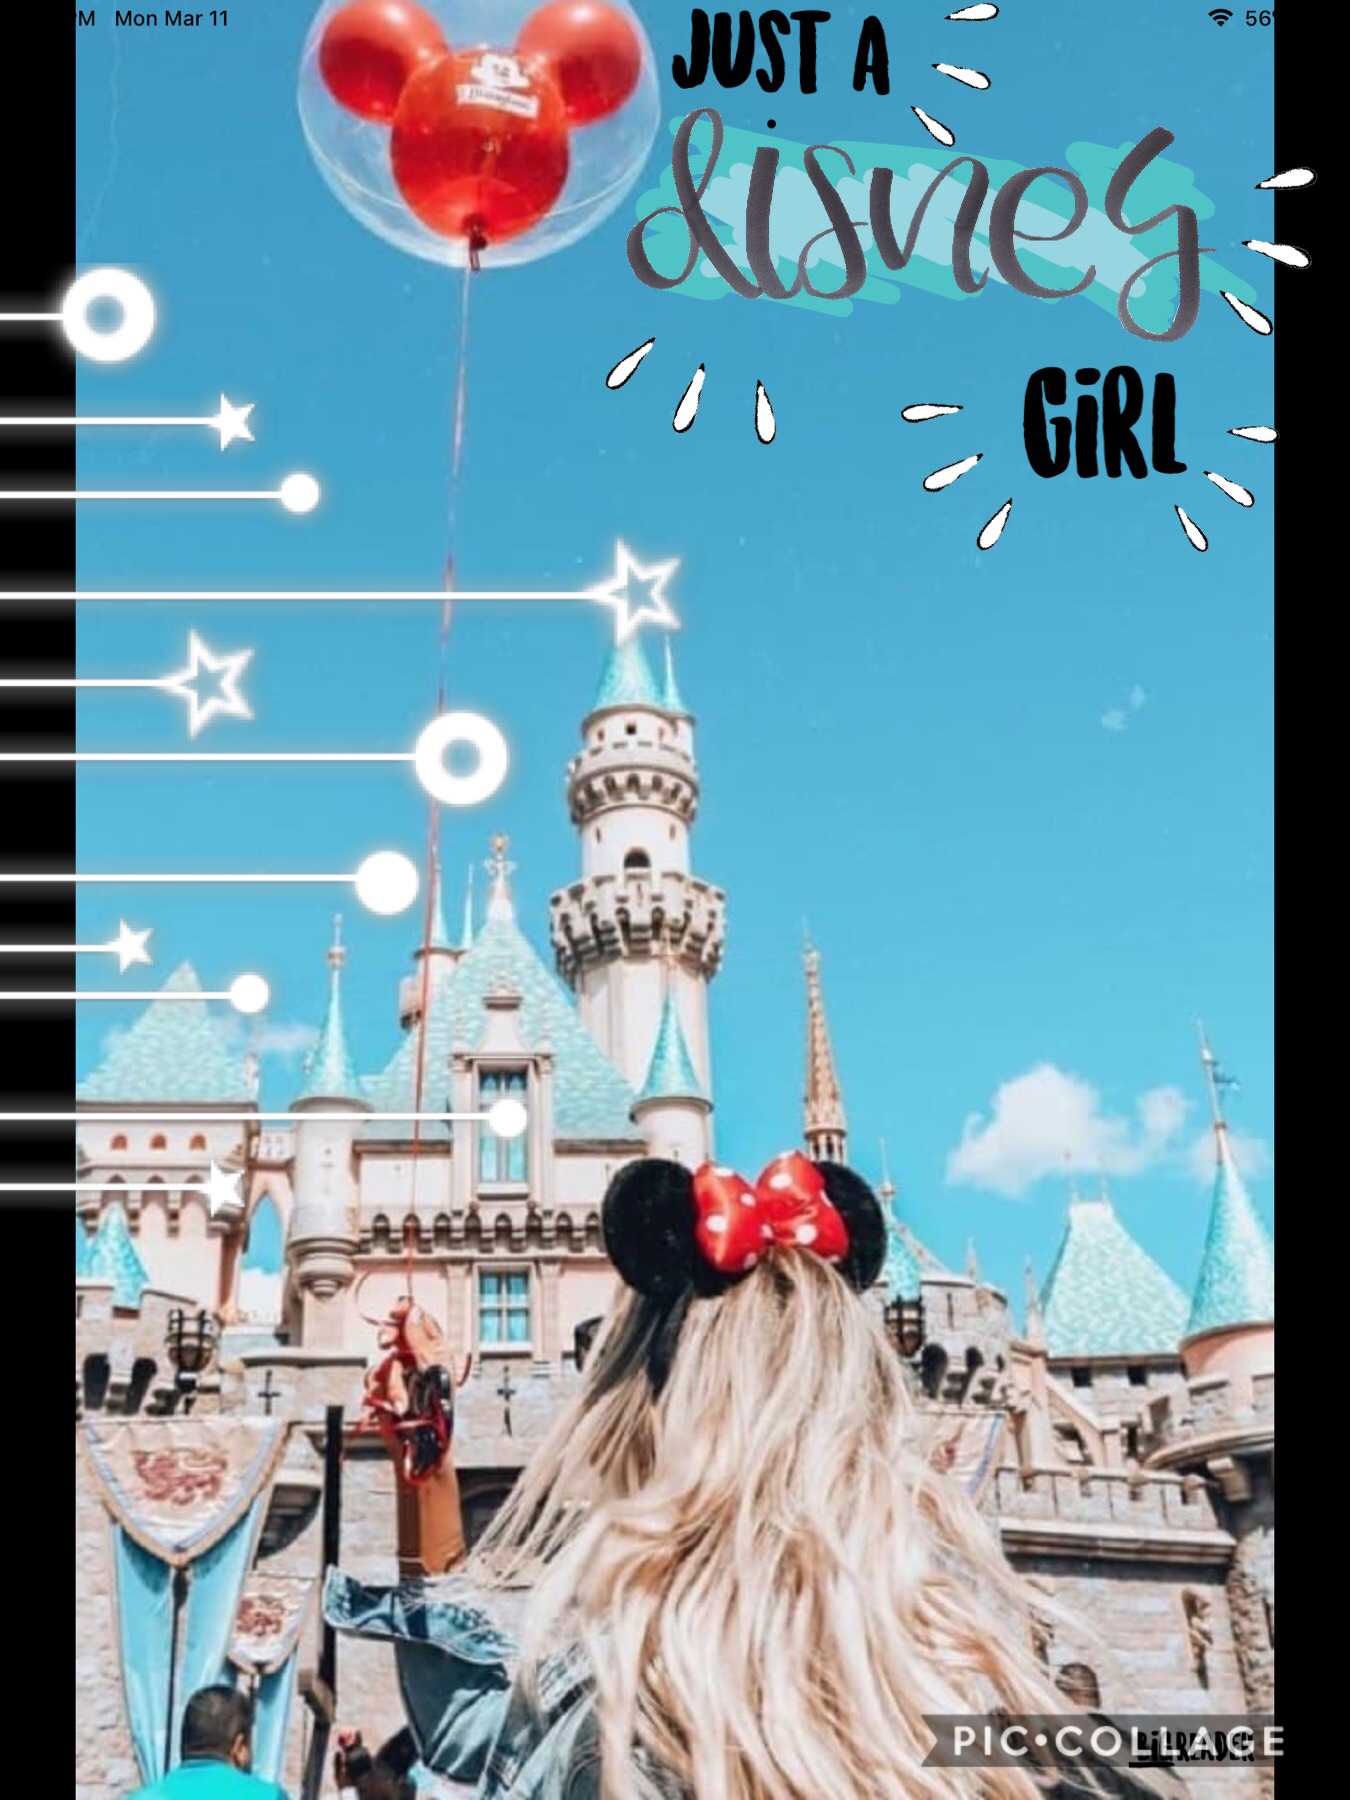 I really am just a Disney girl😂😂🎉 spring break is HERE!!!! Yay!!, I hope y’all have s great break! I might not get to post much the following week cause we are going to the Grand Canyon!🎉super exited for that! Bye y’all!